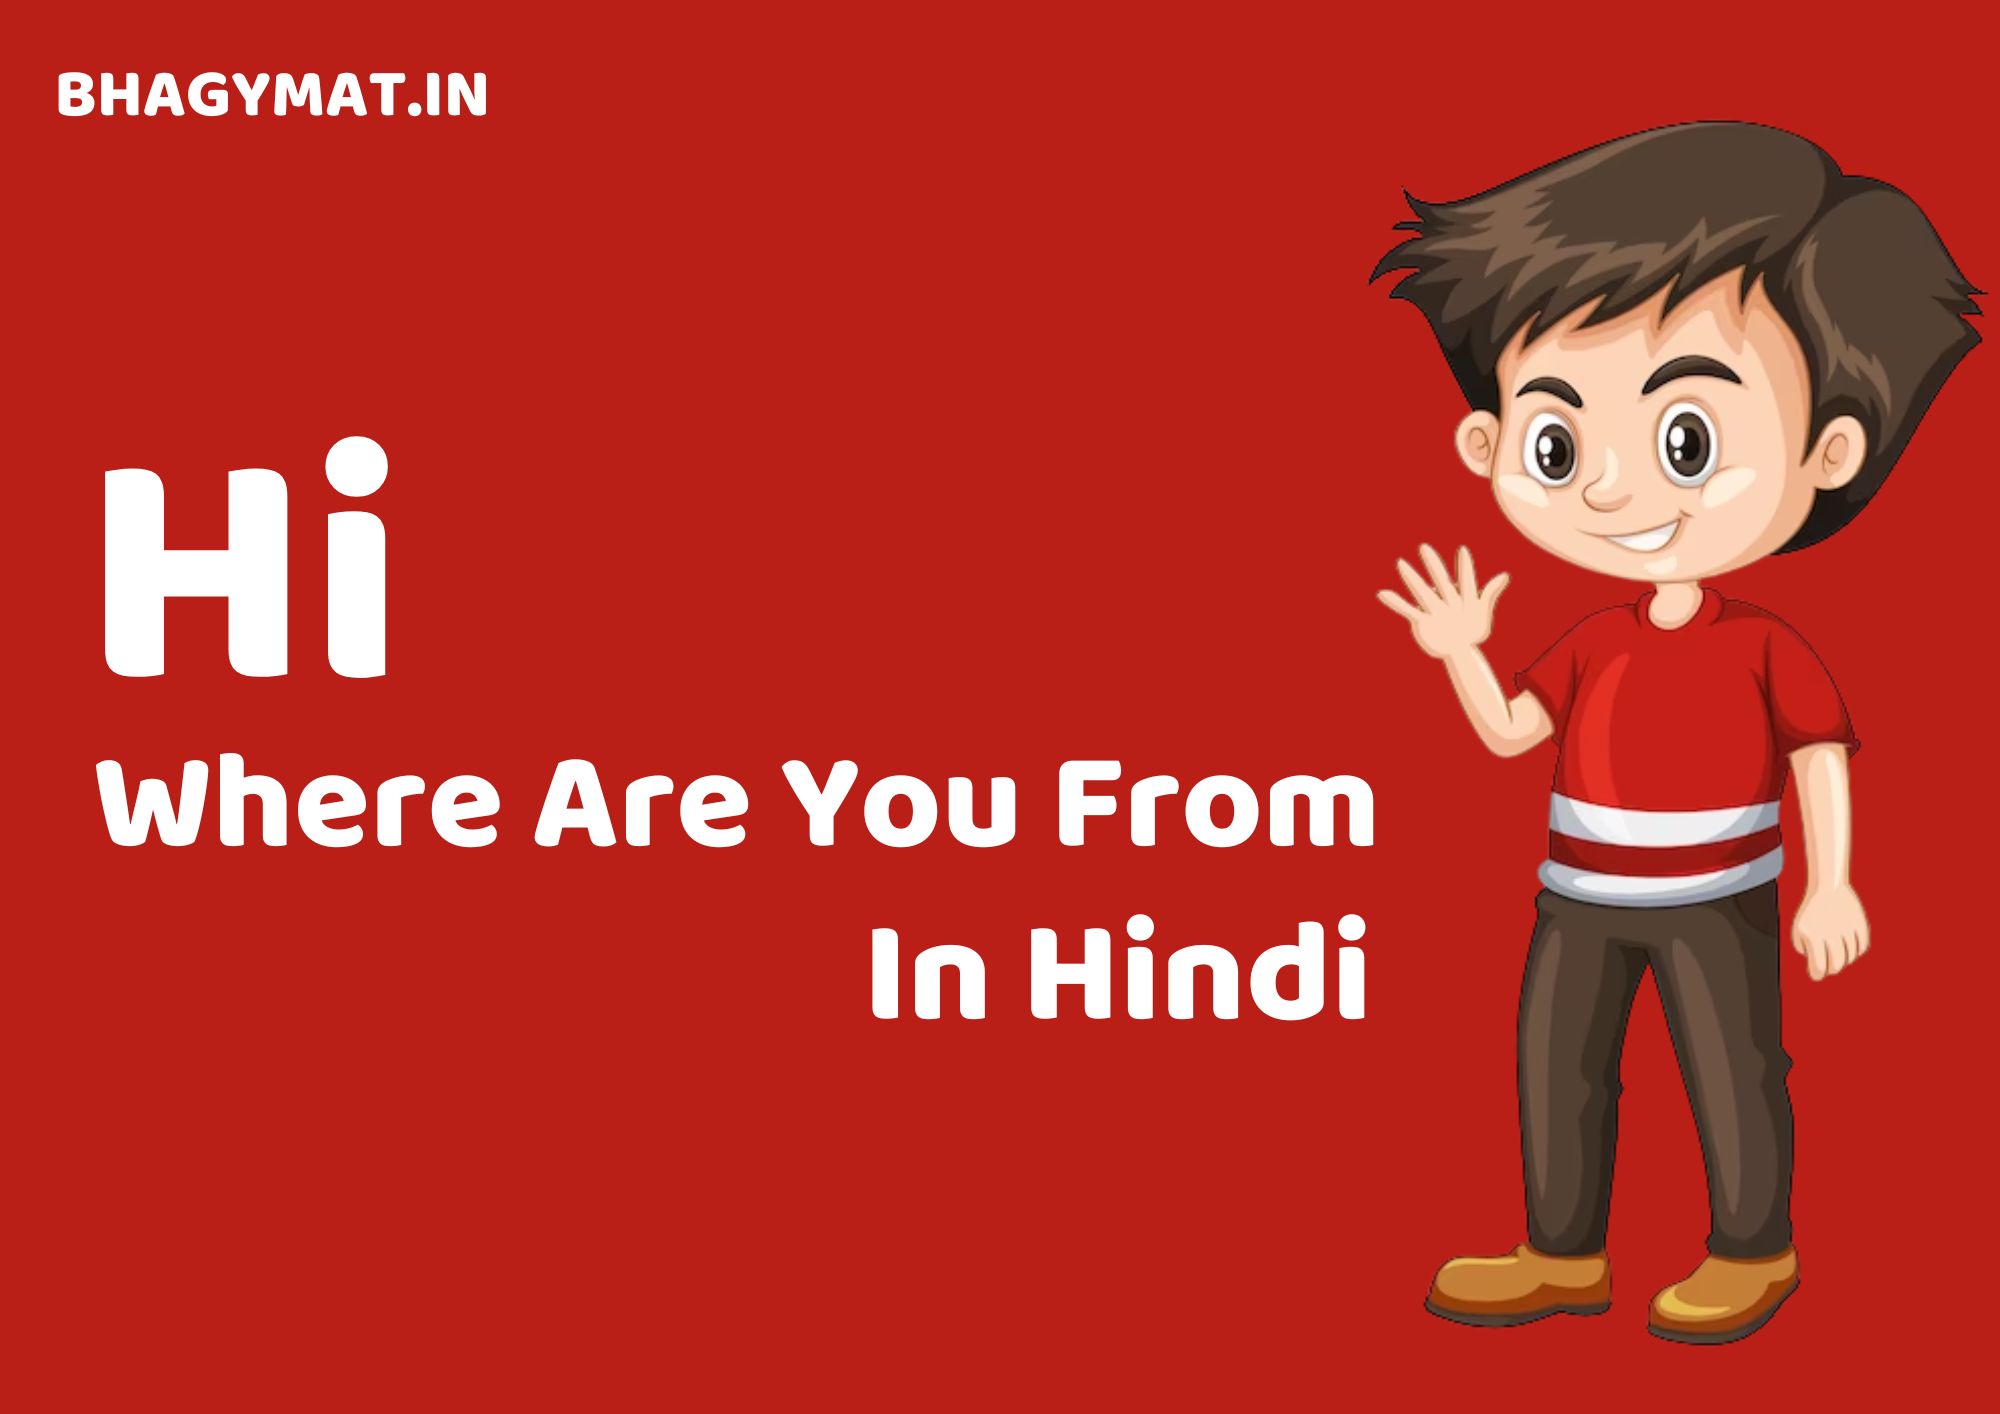 Where are you now Meaning in Hindi  मीनिंग इन हिंदी